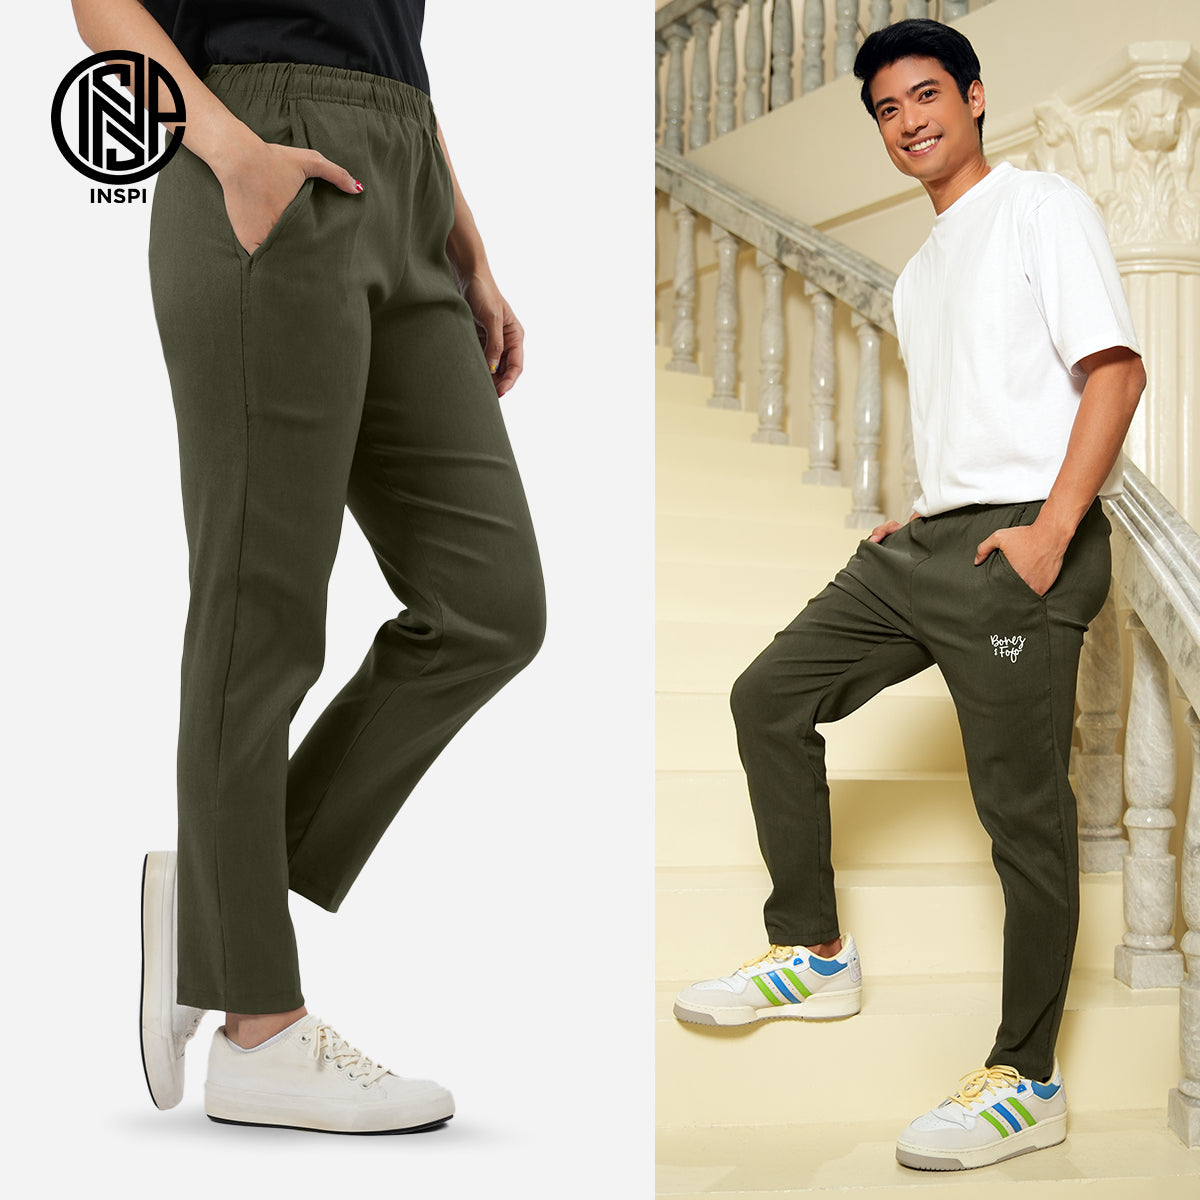 INSPI x Bonez & Fofo Trouser Pants for Men and Women with Side Pockets and Drawstring Collection High Waist Pant Pantalon